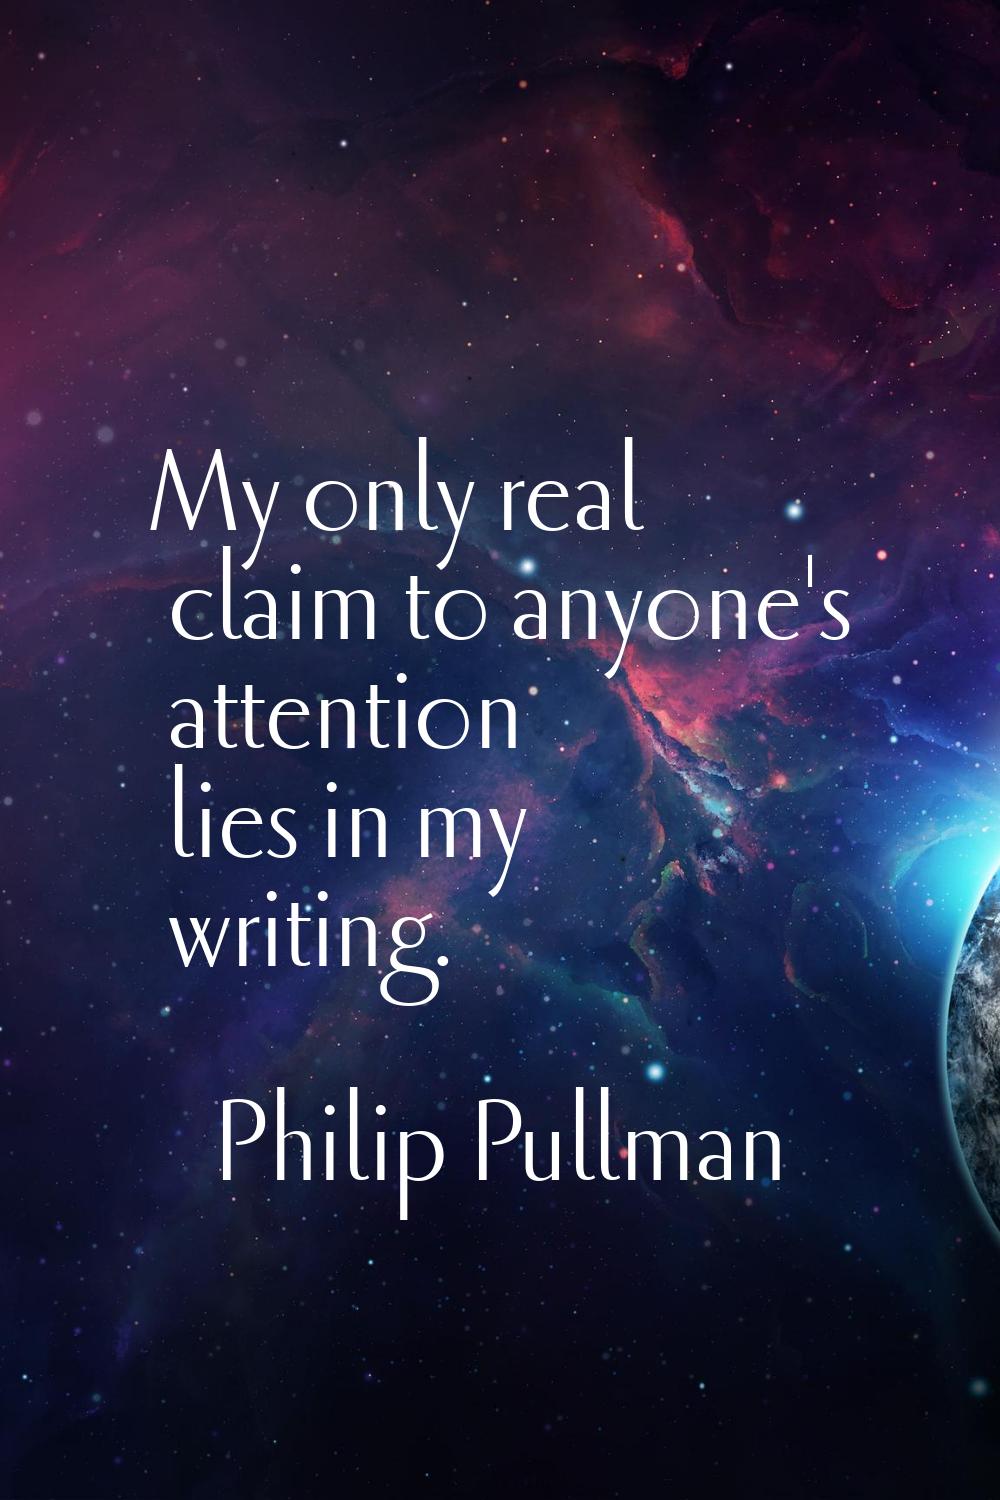 My only real claim to anyone's attention lies in my writing.